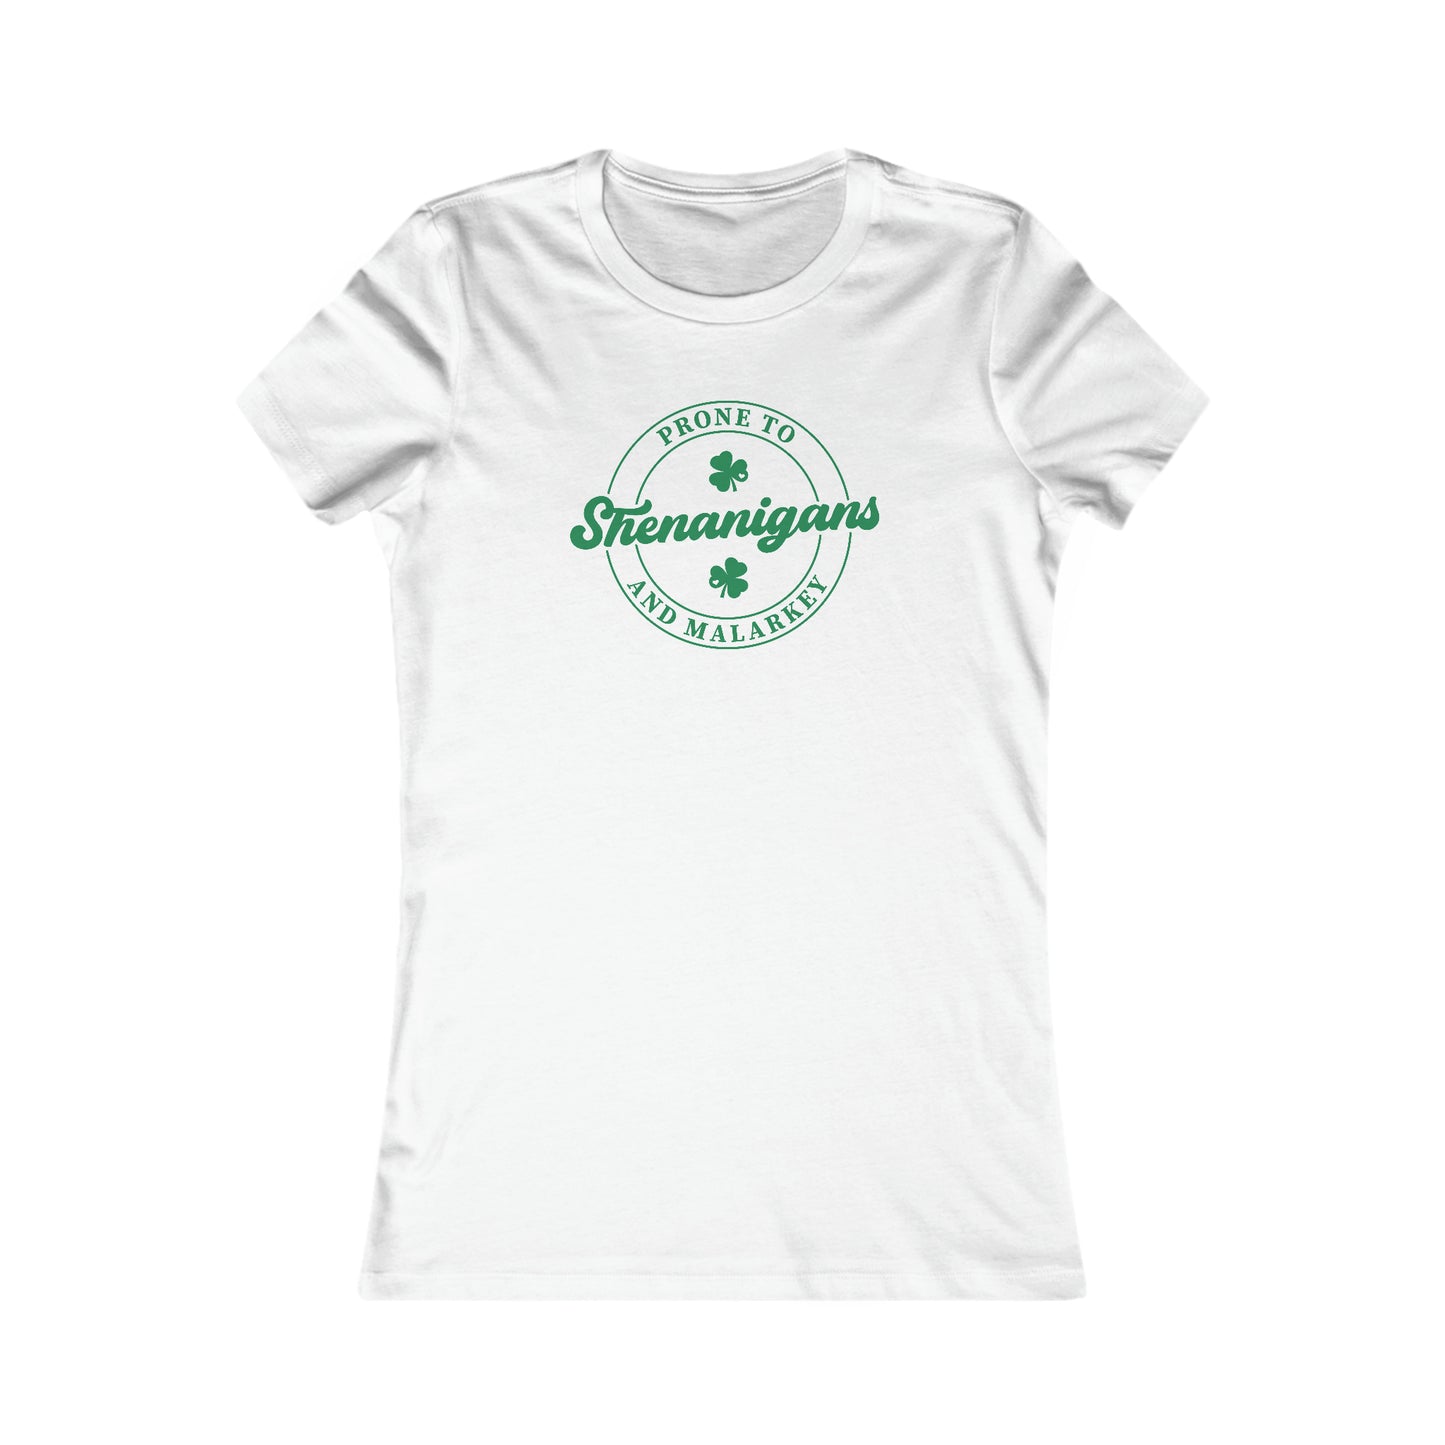 Shenanigans T-Shirt For Malarky T Shirt For St. Paddy's Day TShirt For Ladies St. Patrick's Day Shirt